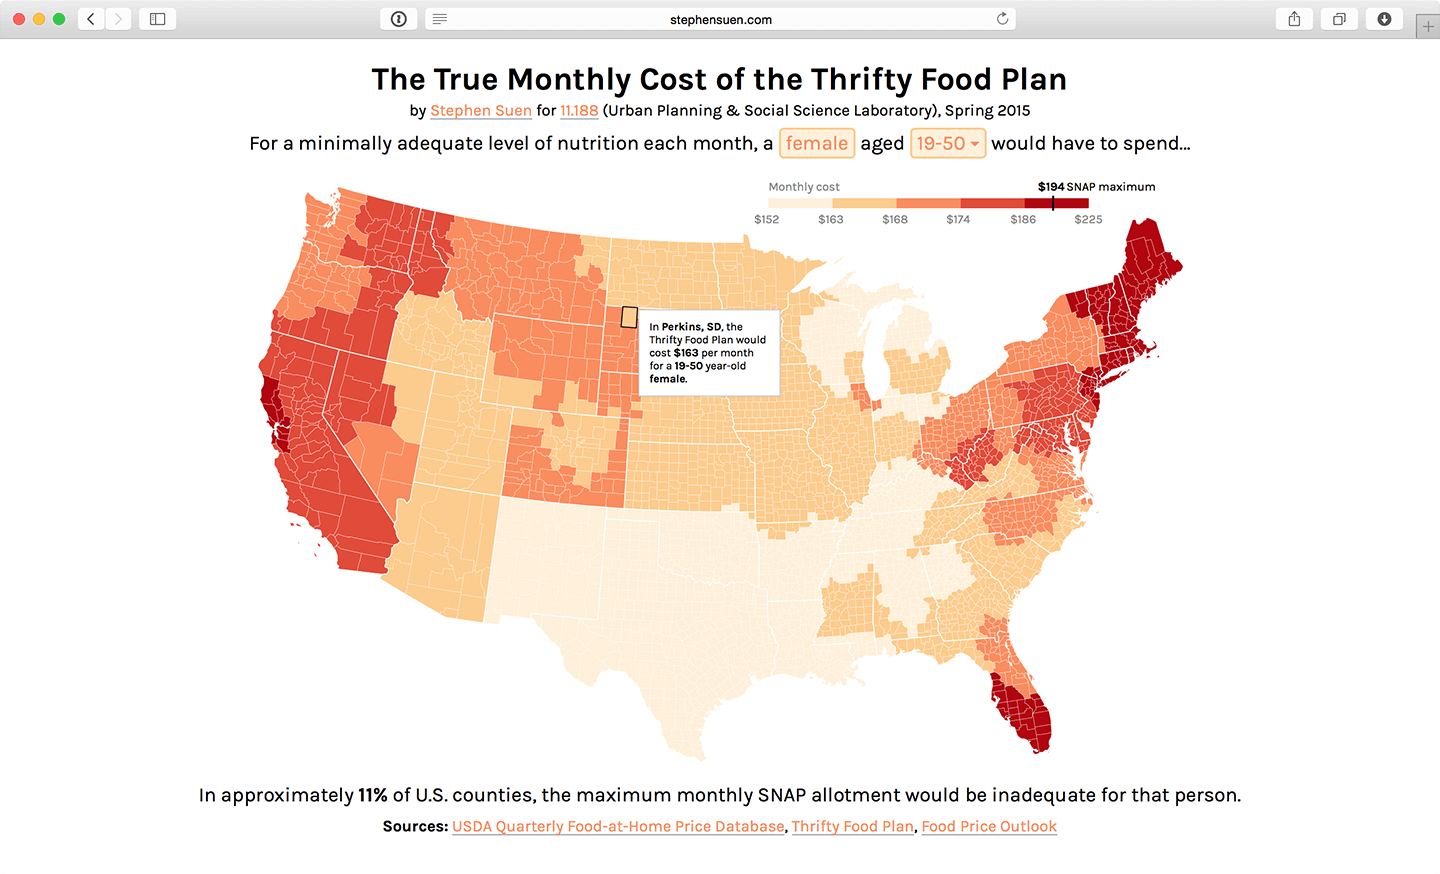 Choropleth map of the estimated cost of the Thrifty Food Plan, the U.S. government's minimum viable diet